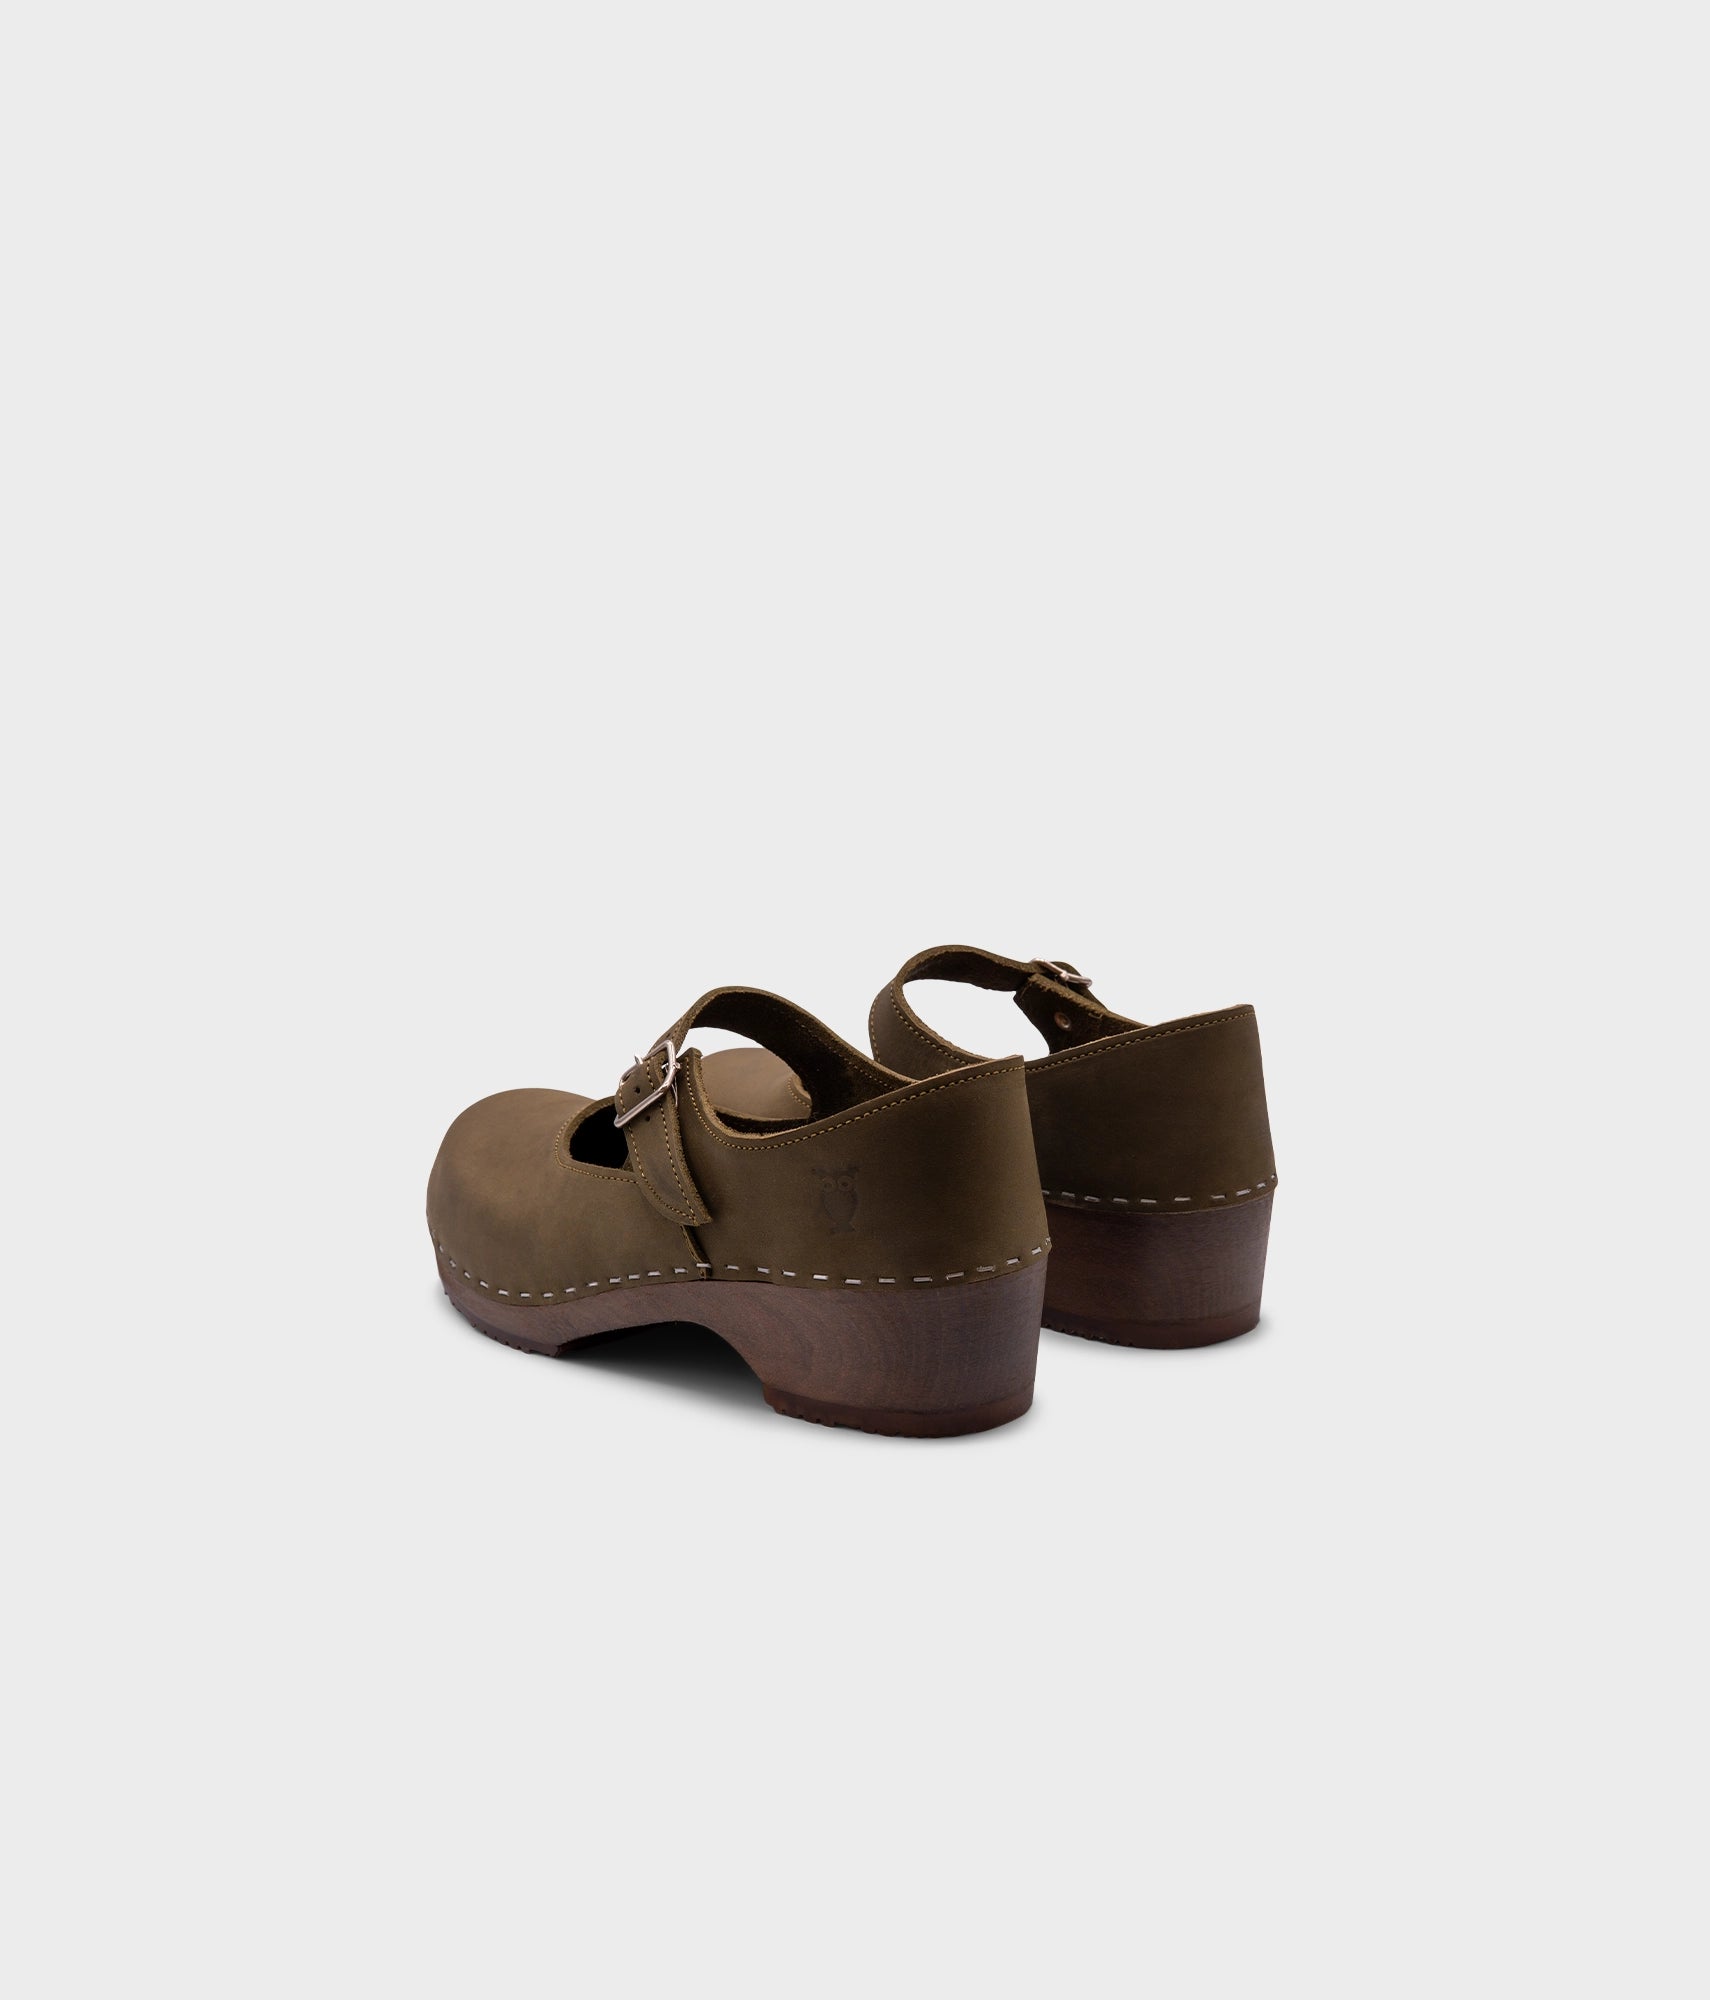 Mary Jane wooden clogs in olive green nubuck leather stapled on a dark wooden base